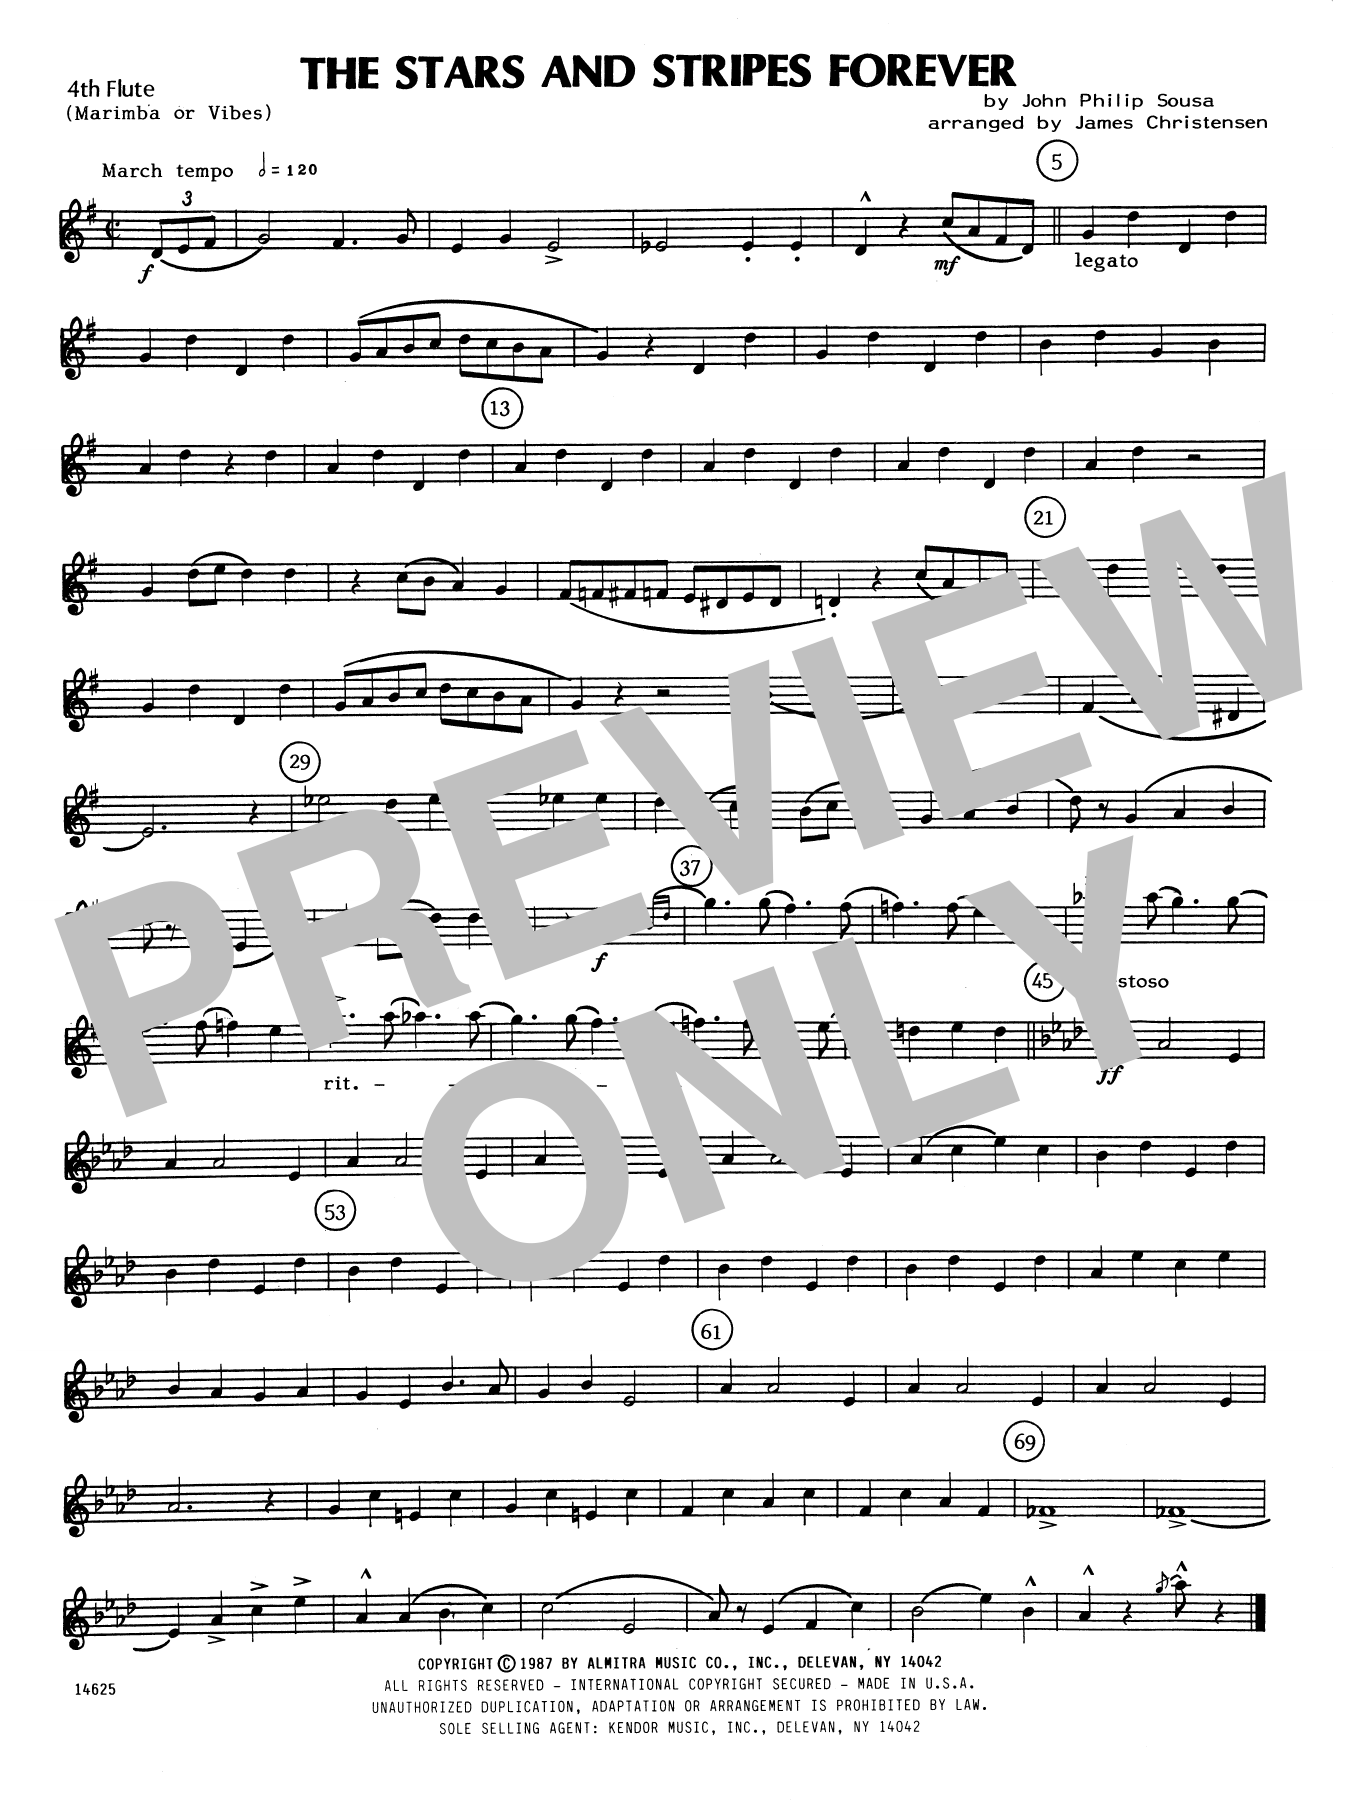 Download James Christensen The Stars and Stripes Forever - 4th Flu Sheet Music